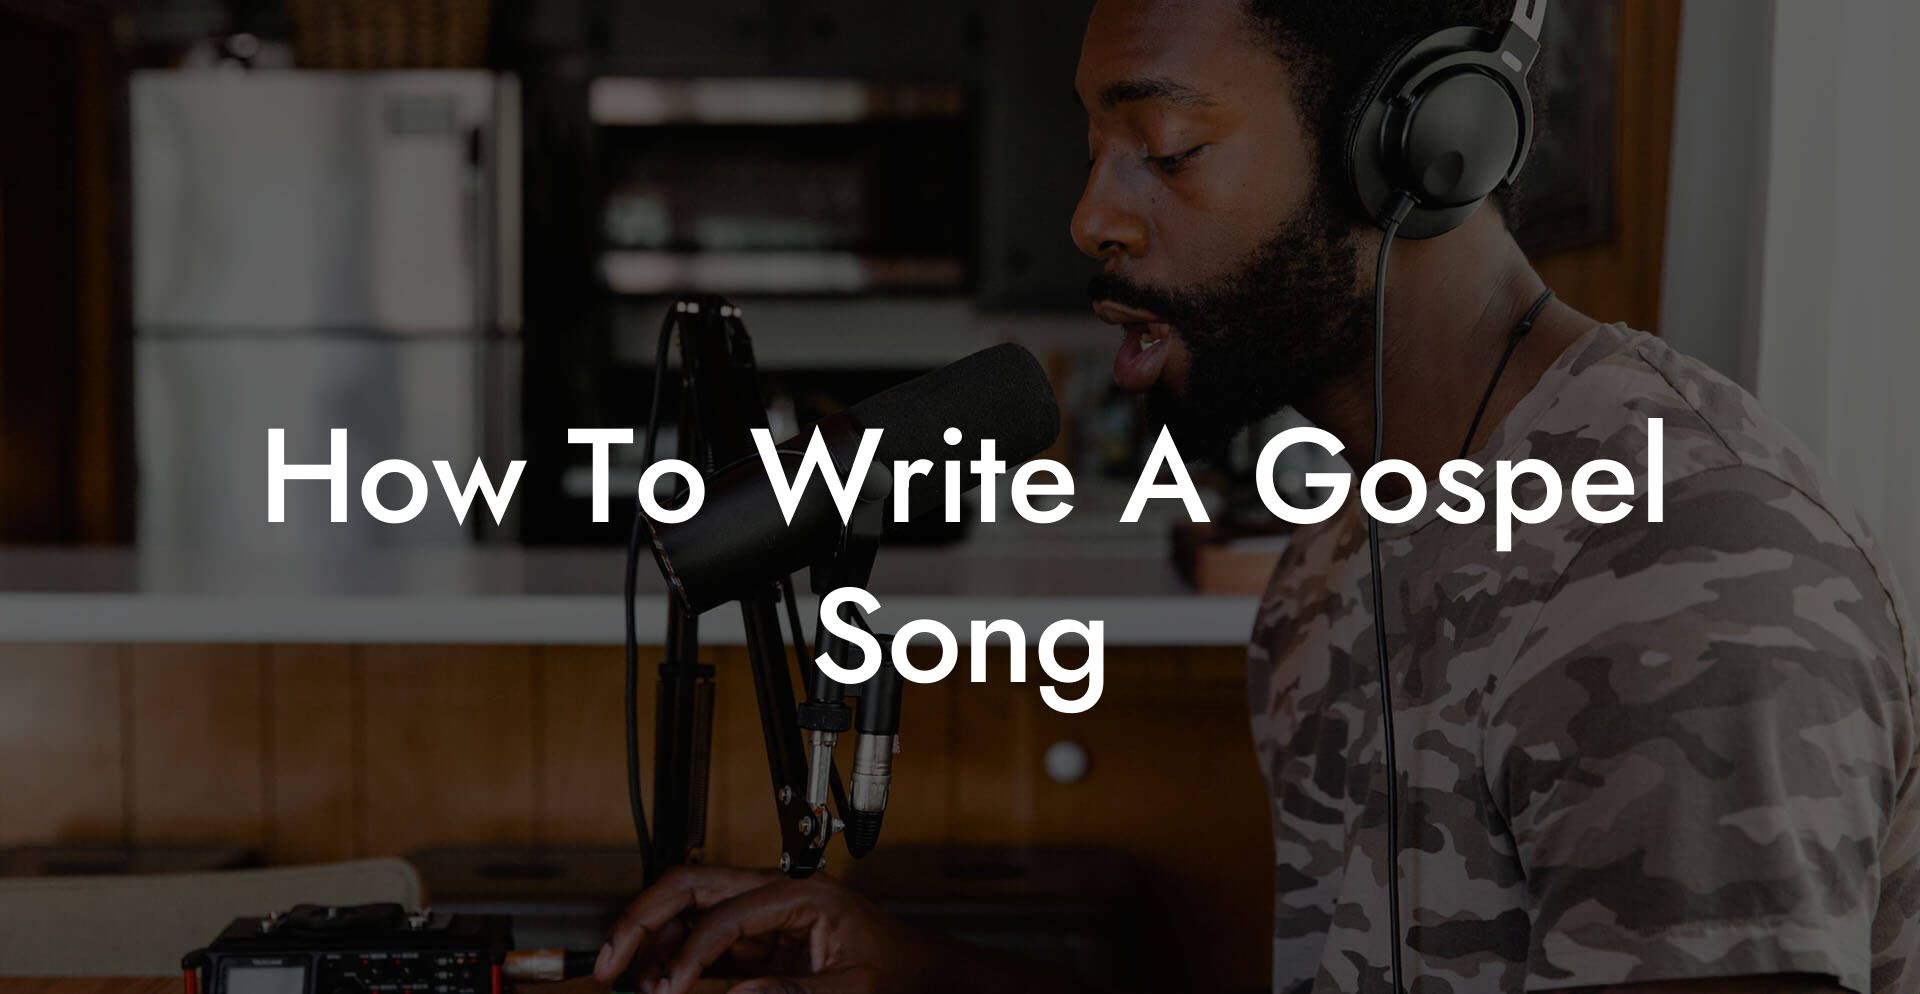 how to write a gospel song lyric assistant